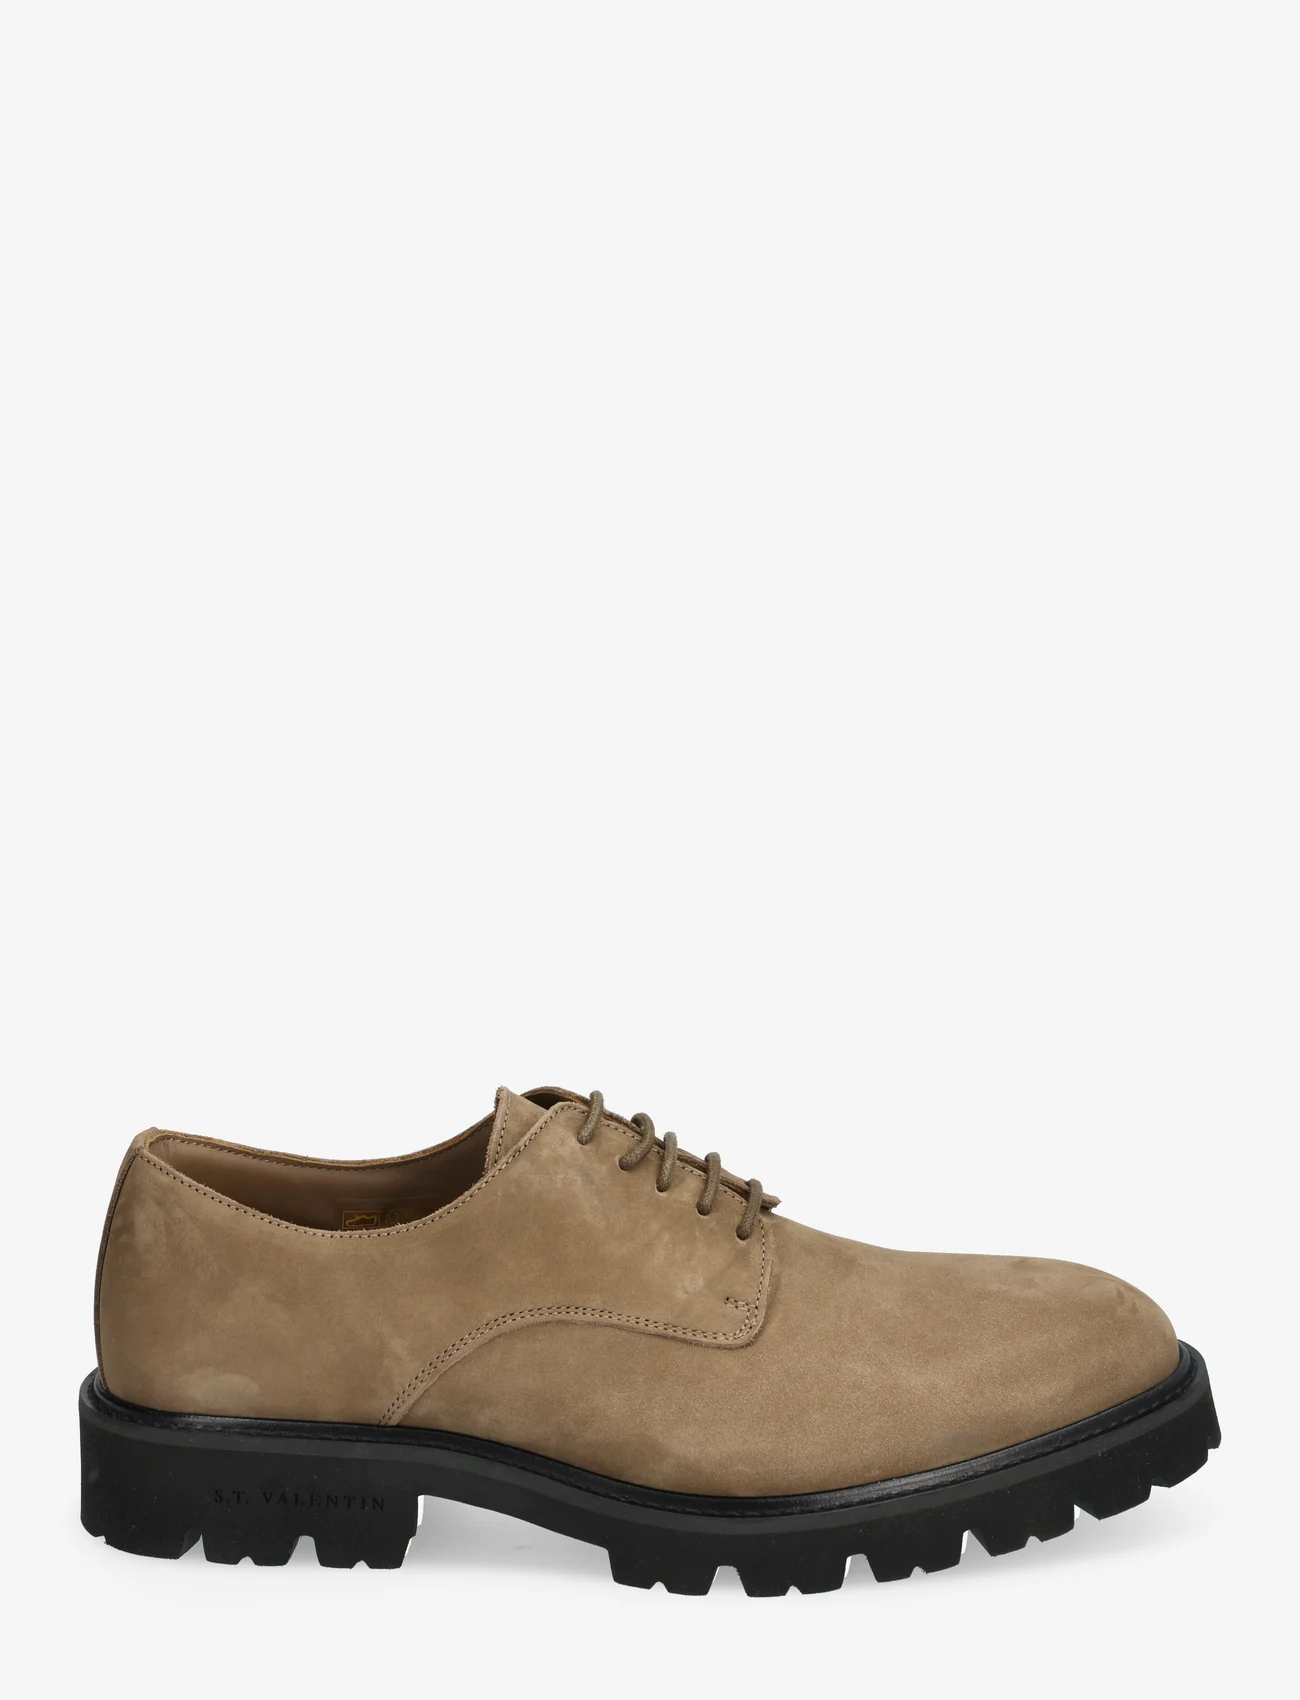 S.T. VALENTIN - Lightweight Derby - Grained leather - laced shoes - taupe - 1